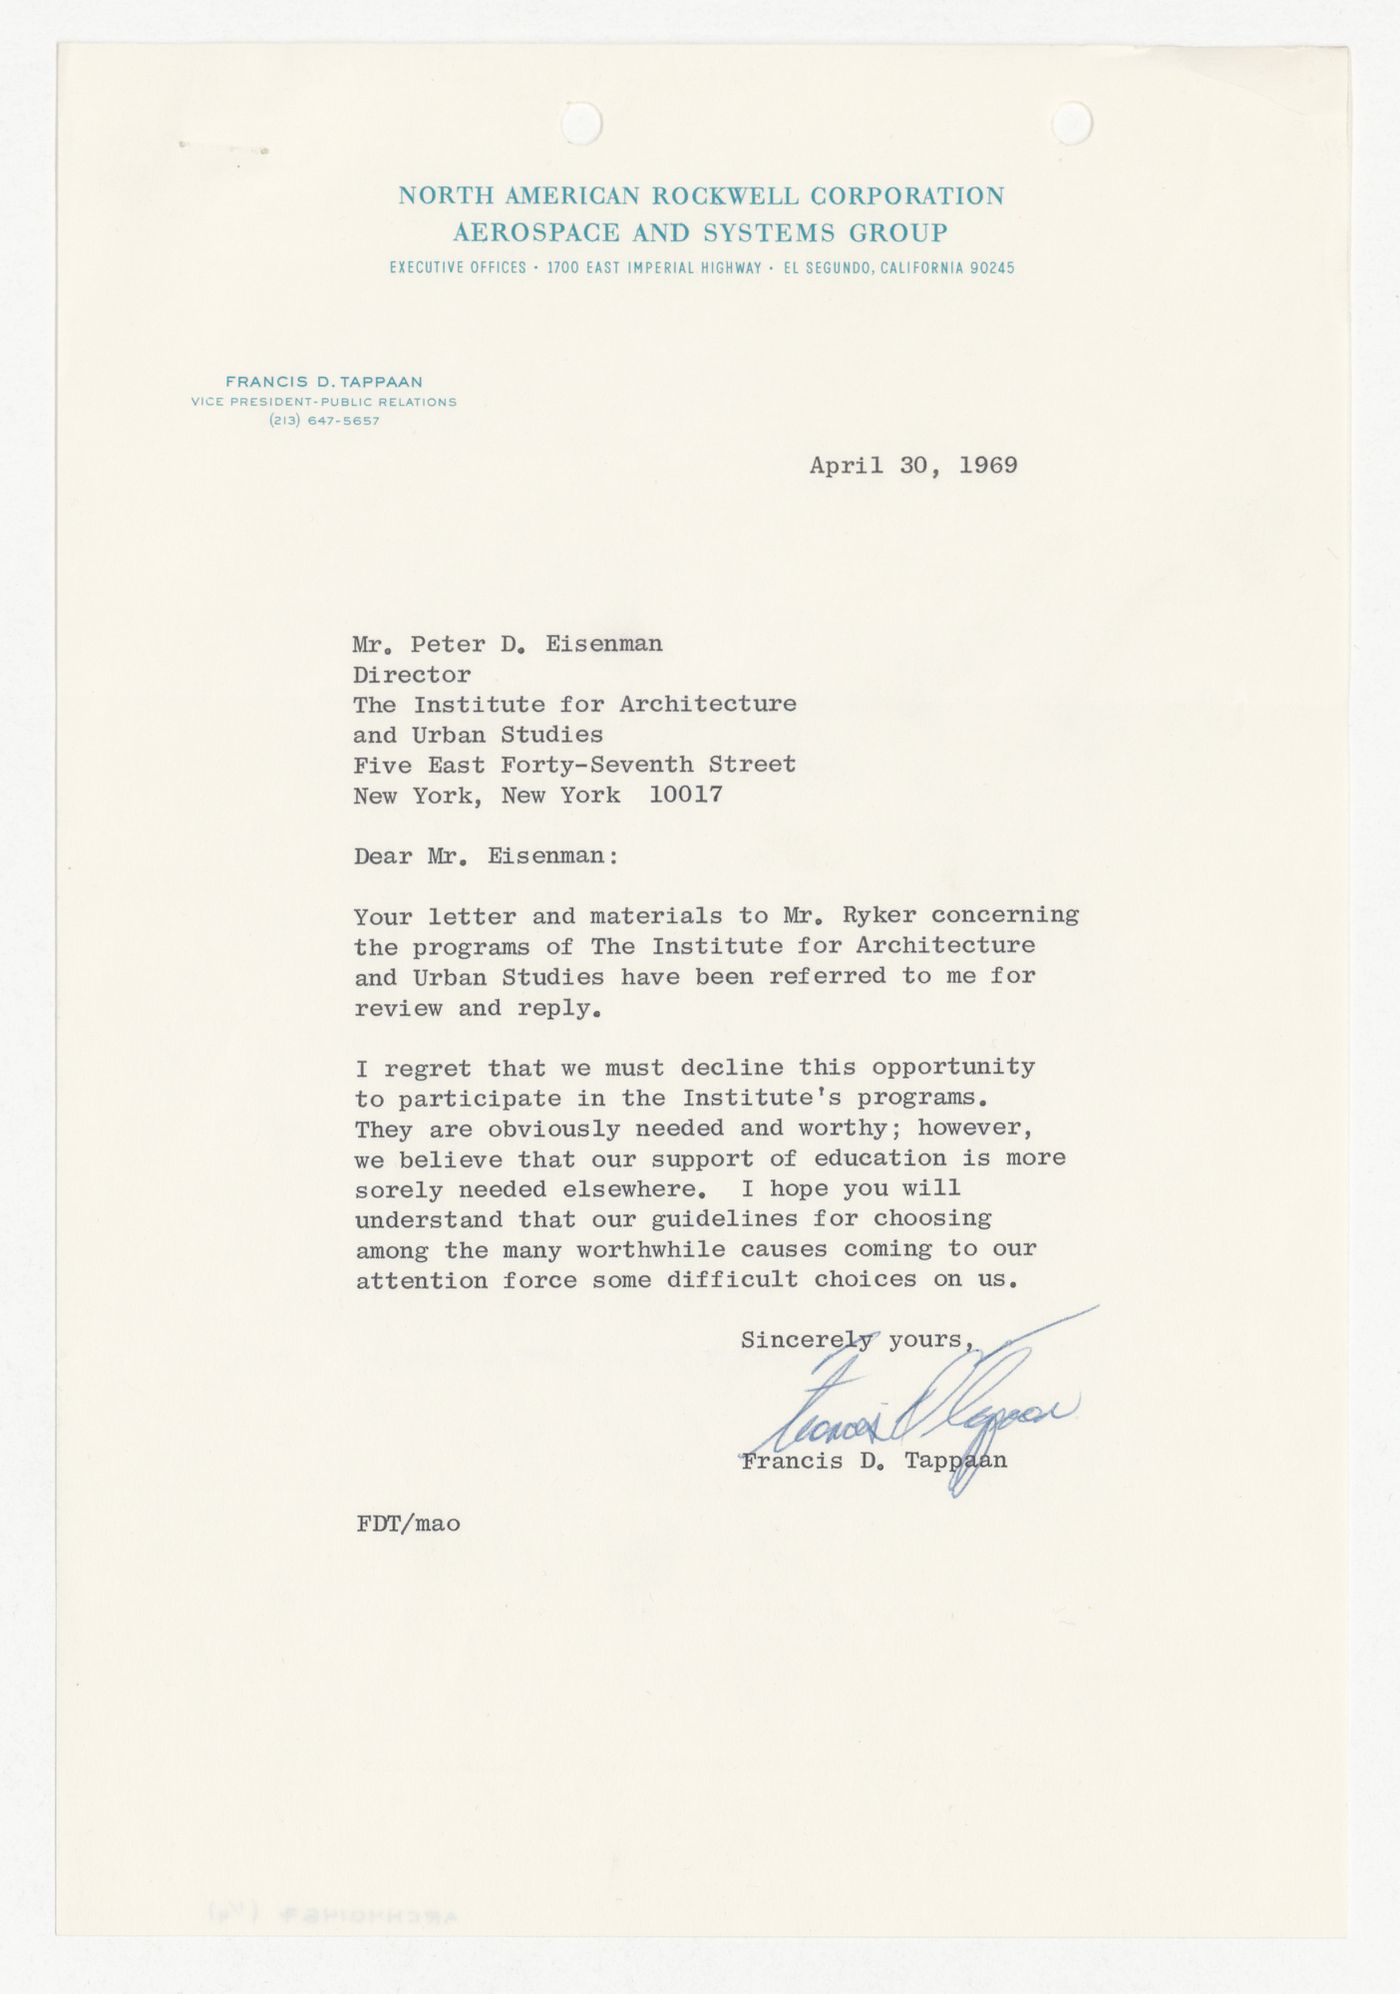 Letter from Francis D. Tappaan to Peter D. Eisenman responding to a donation request made by Eisenman with attached press release for a television special and copy of the original letter